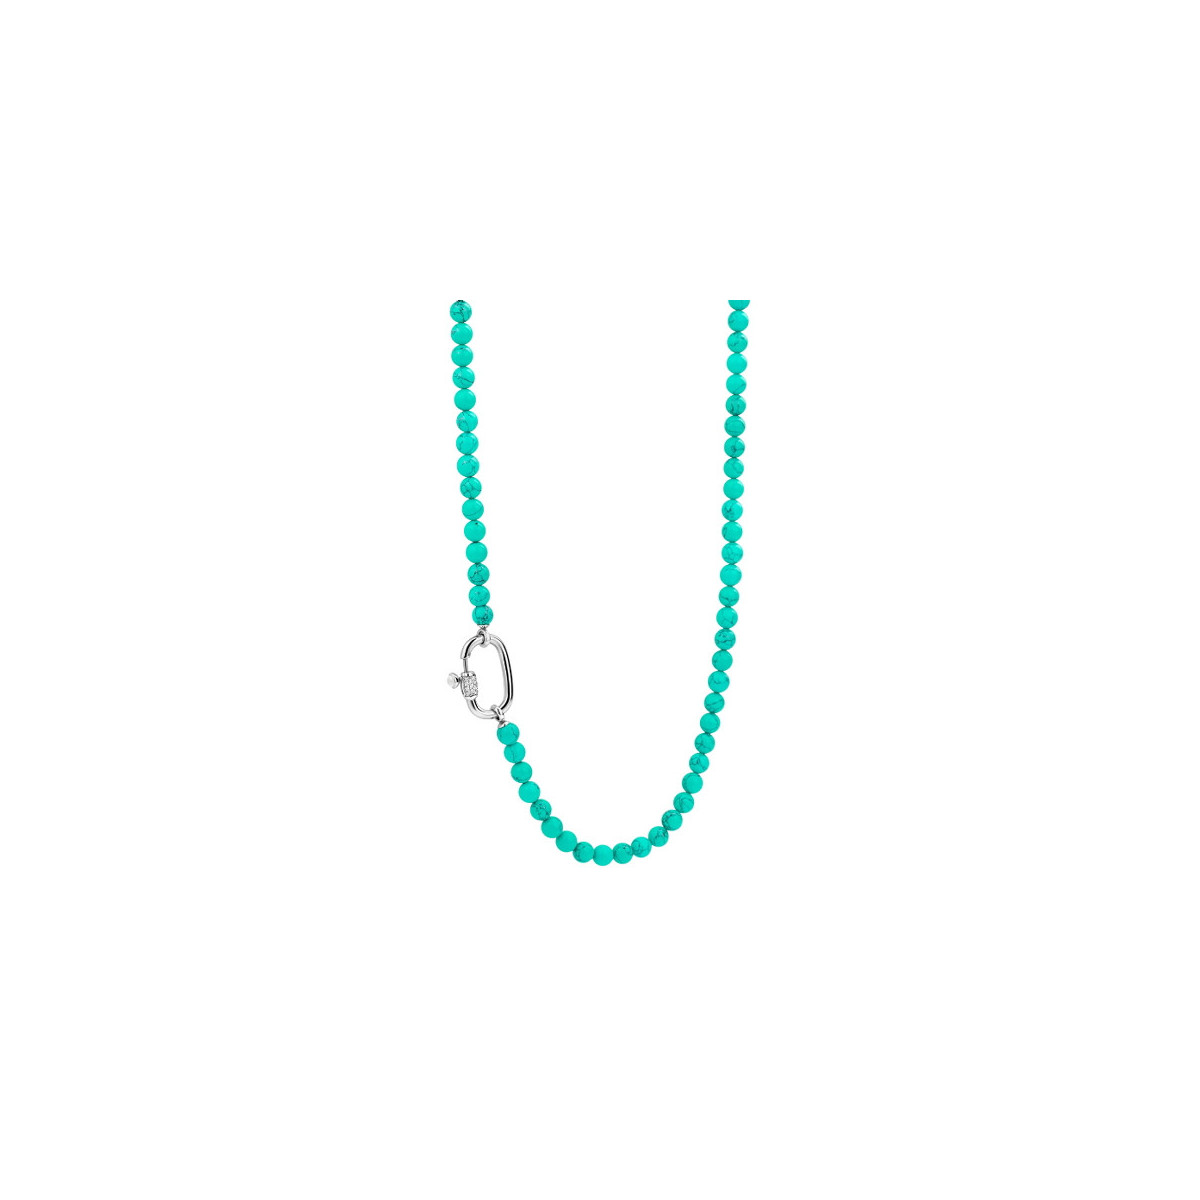 TURQUOISE TYPE BEADS NECKLACE